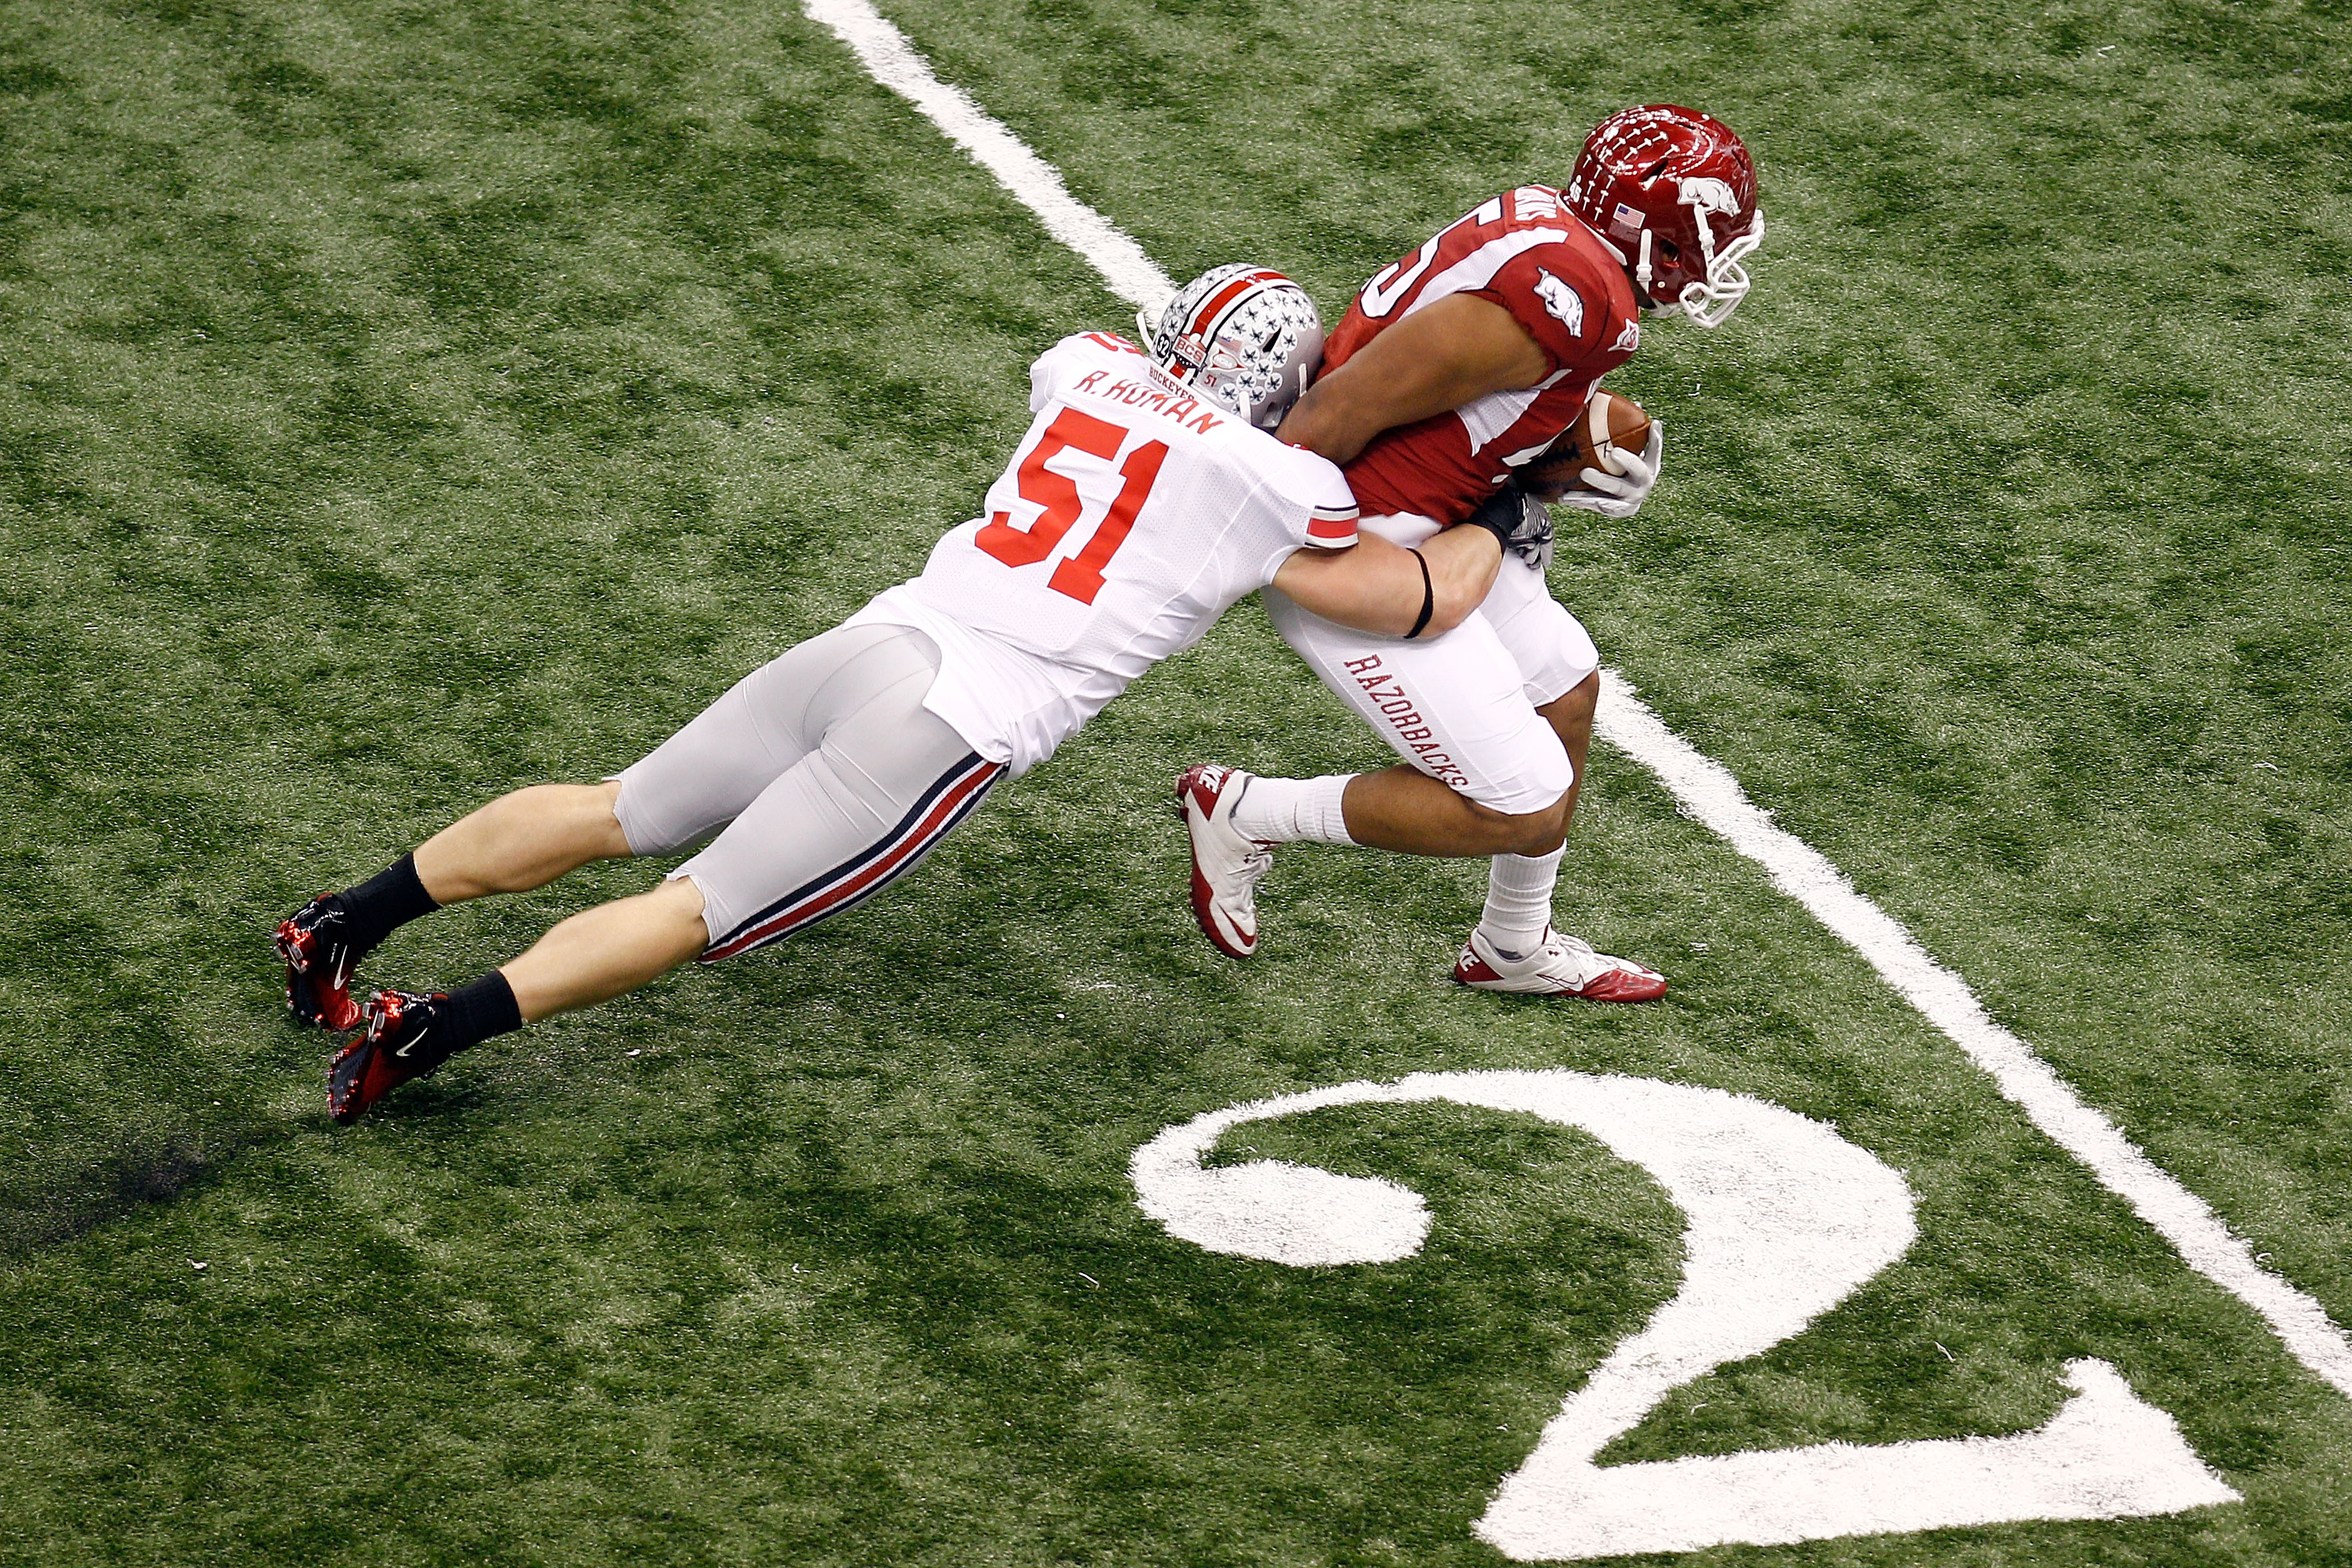 NEW ORLEANS, LA - JANUARY 04:  D.J. Williams #45 of the Arkansas Razorbacks attempts to not touch the ground as he tries to break a tackle by Ross Homan #51 of the Ohio State Buckeyes in the first half during the Allstate Sugar Bowl at the Louisiana Super